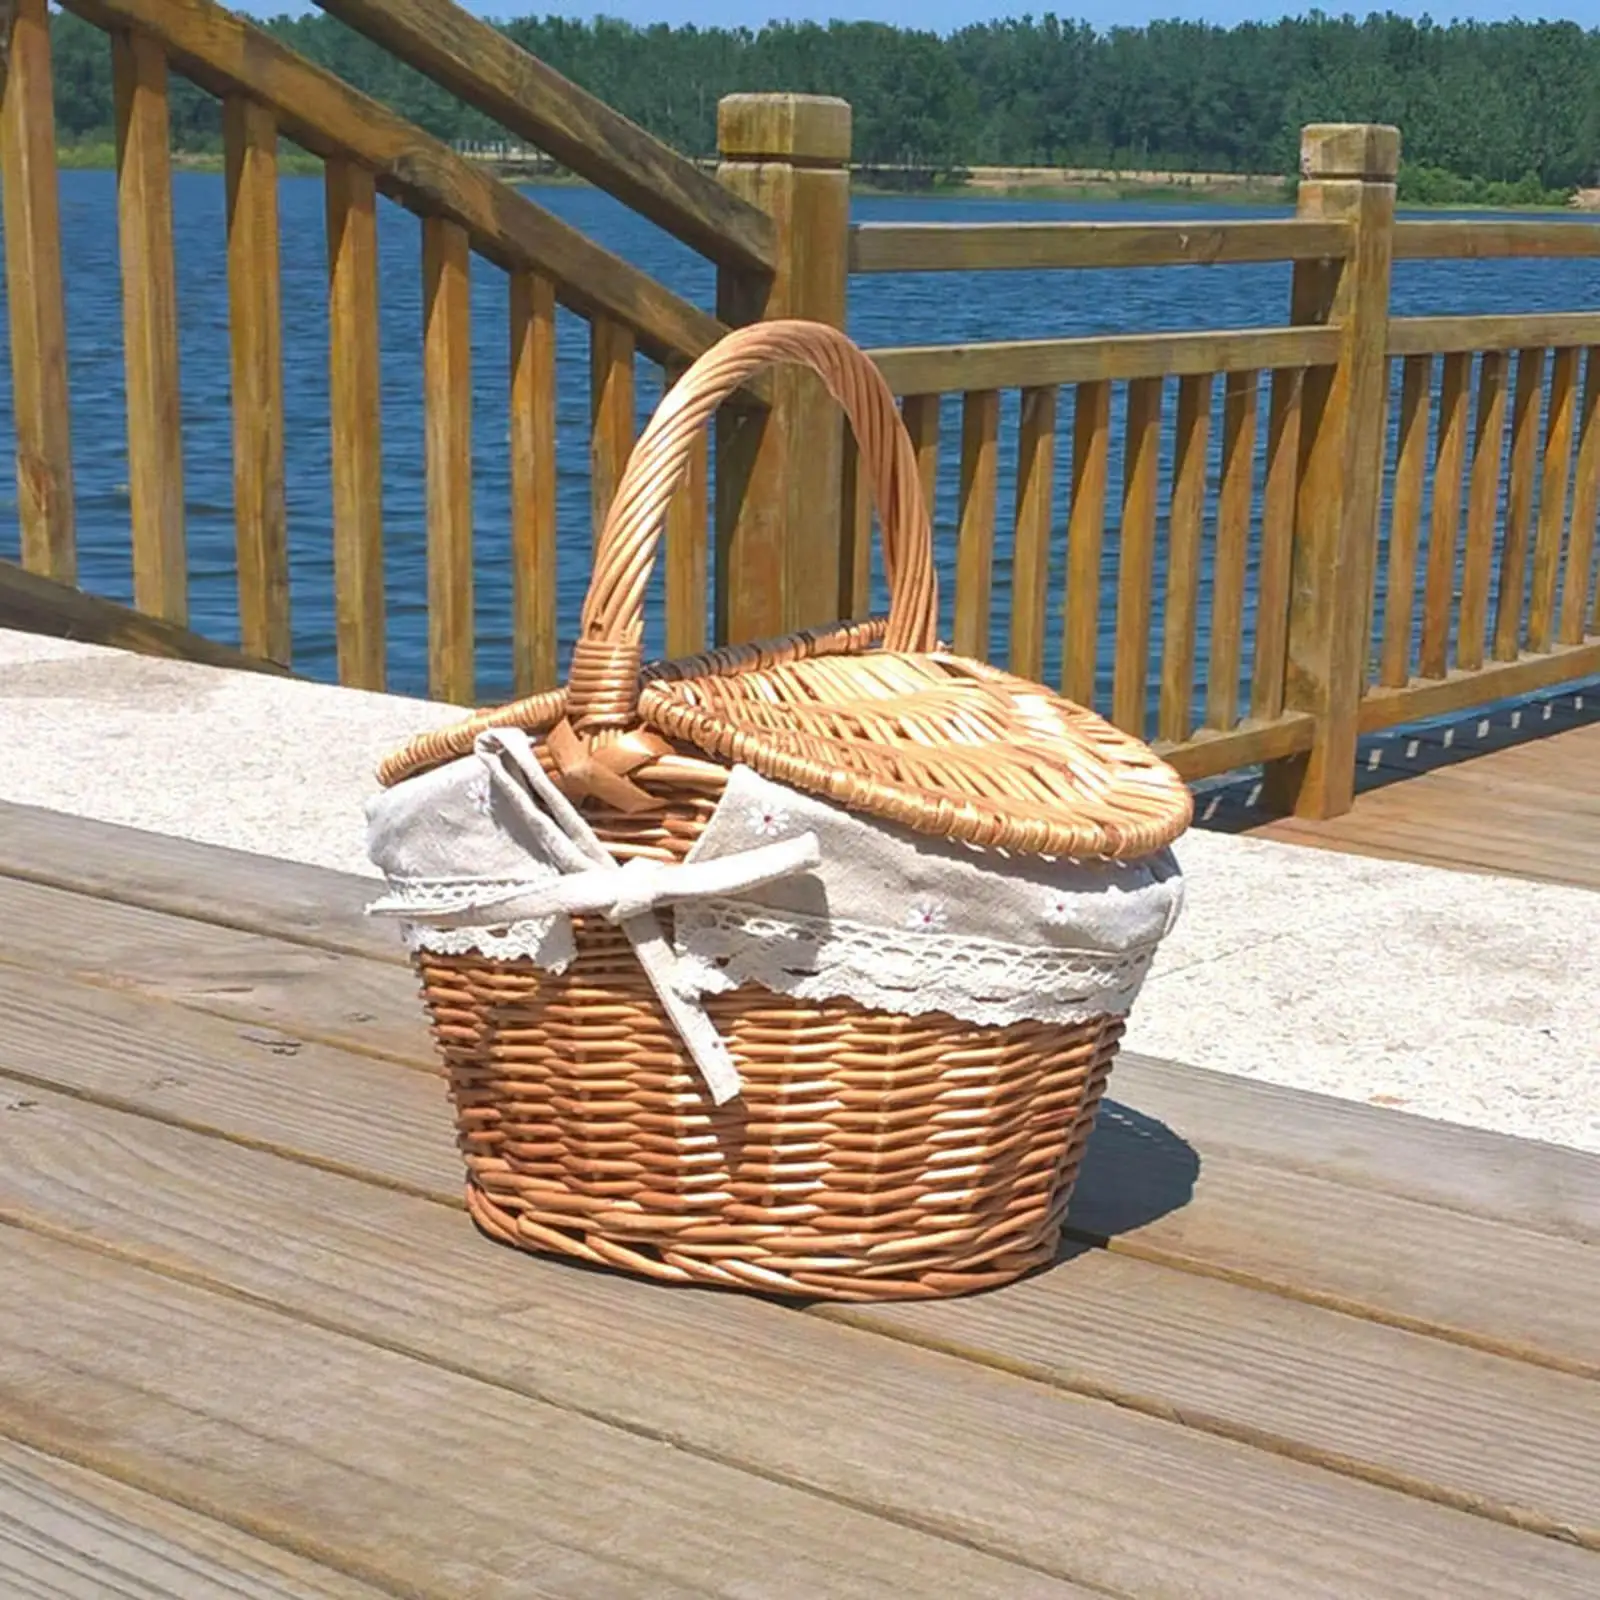 Handwoven Wicker Picnic Basket with Lid and Handle for Chips Fruits Bread